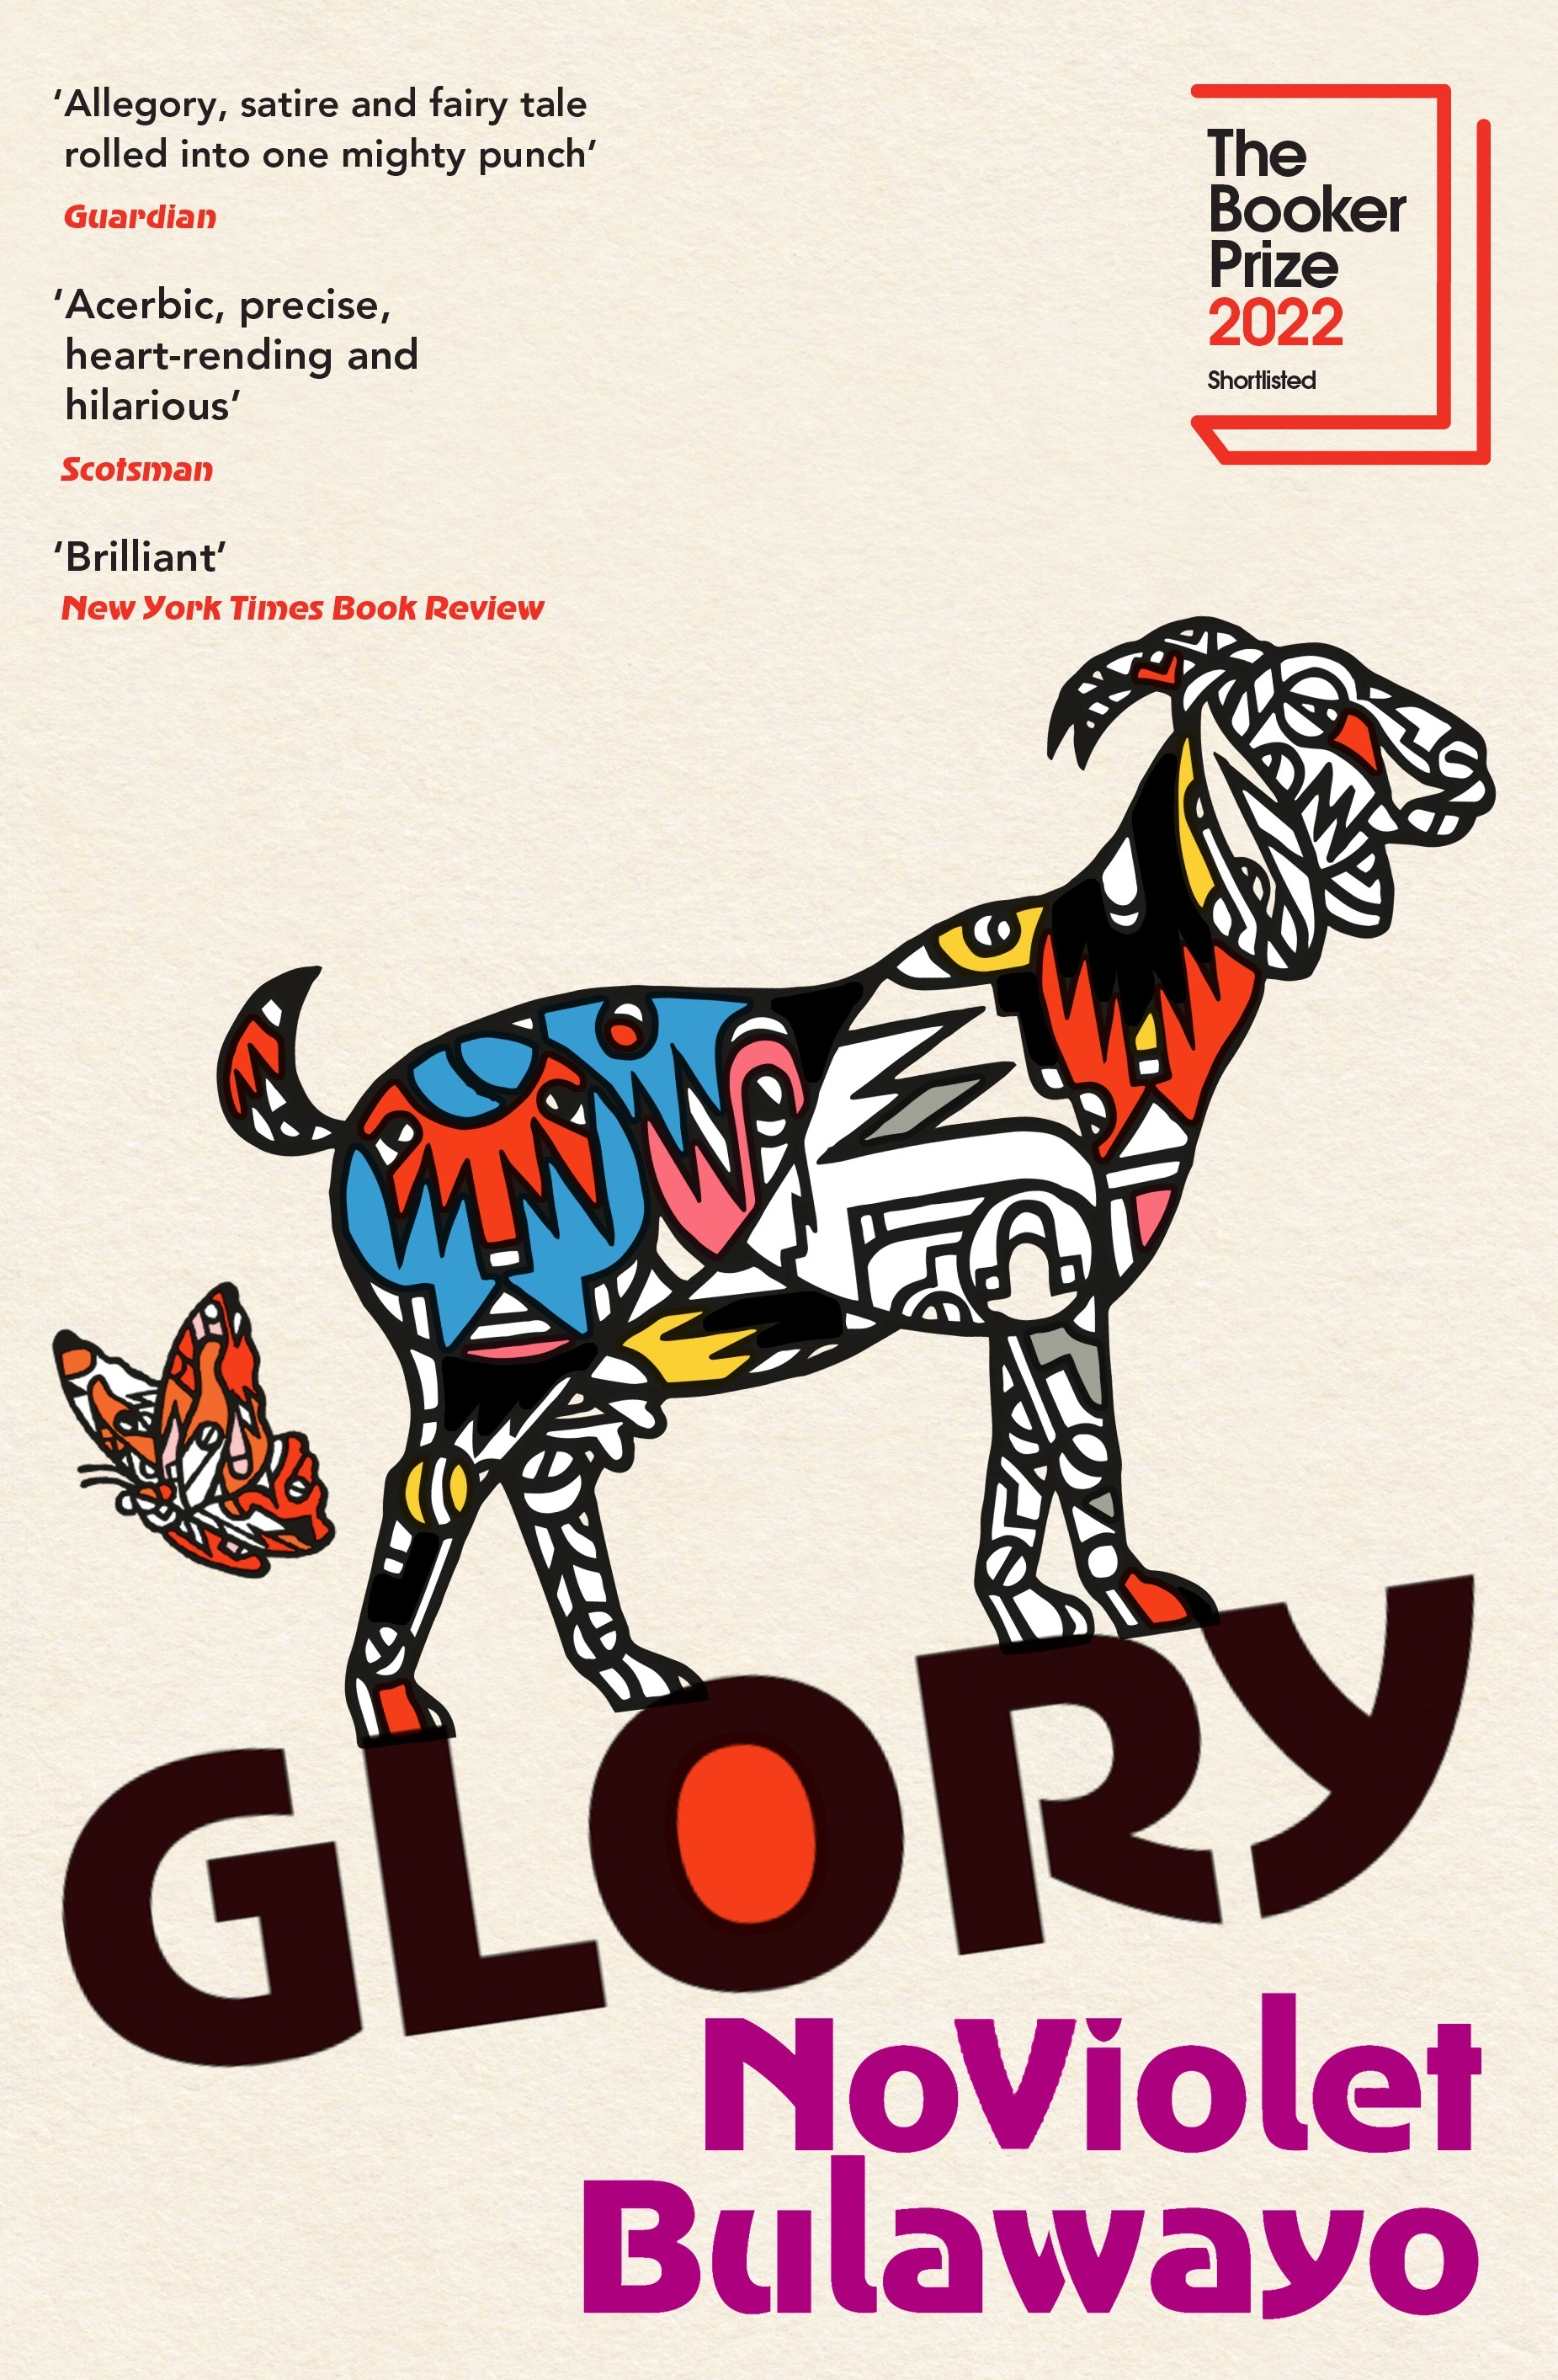 Book cover with text and illustration of a goat and a butterfly